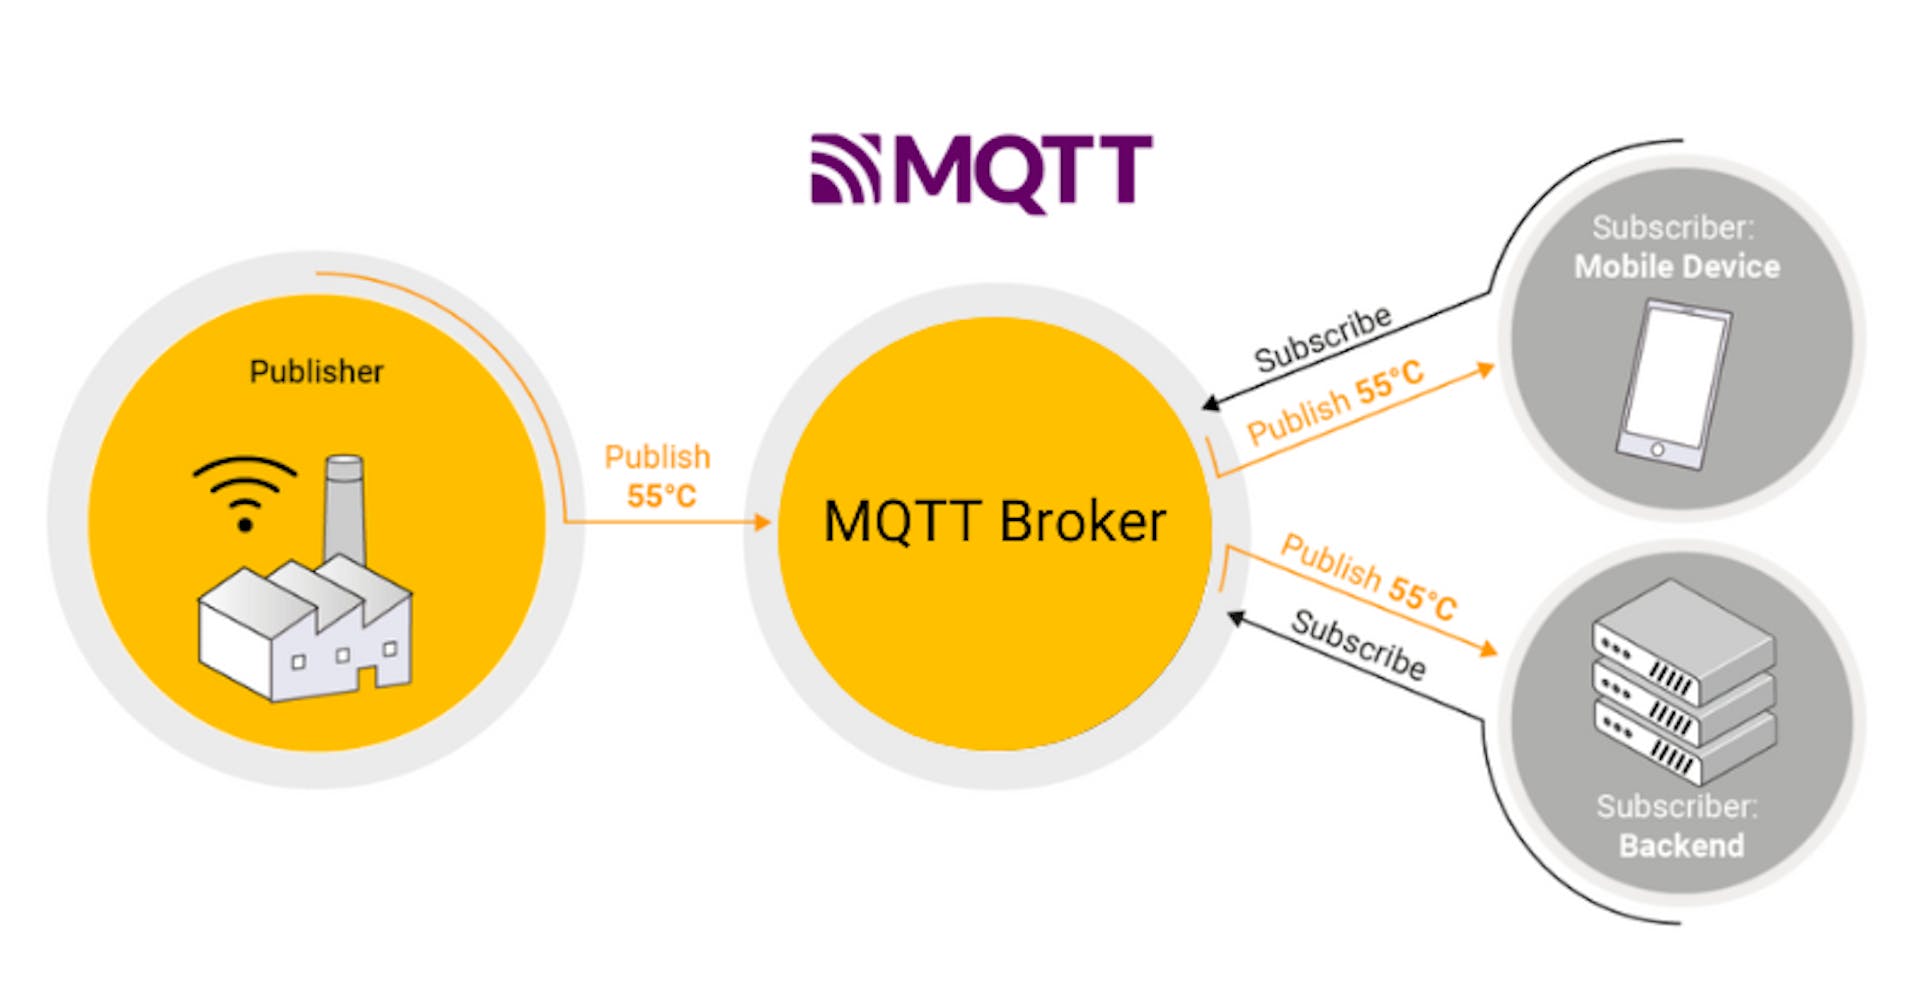 Figure 1: How an MQTT-based messaging system works